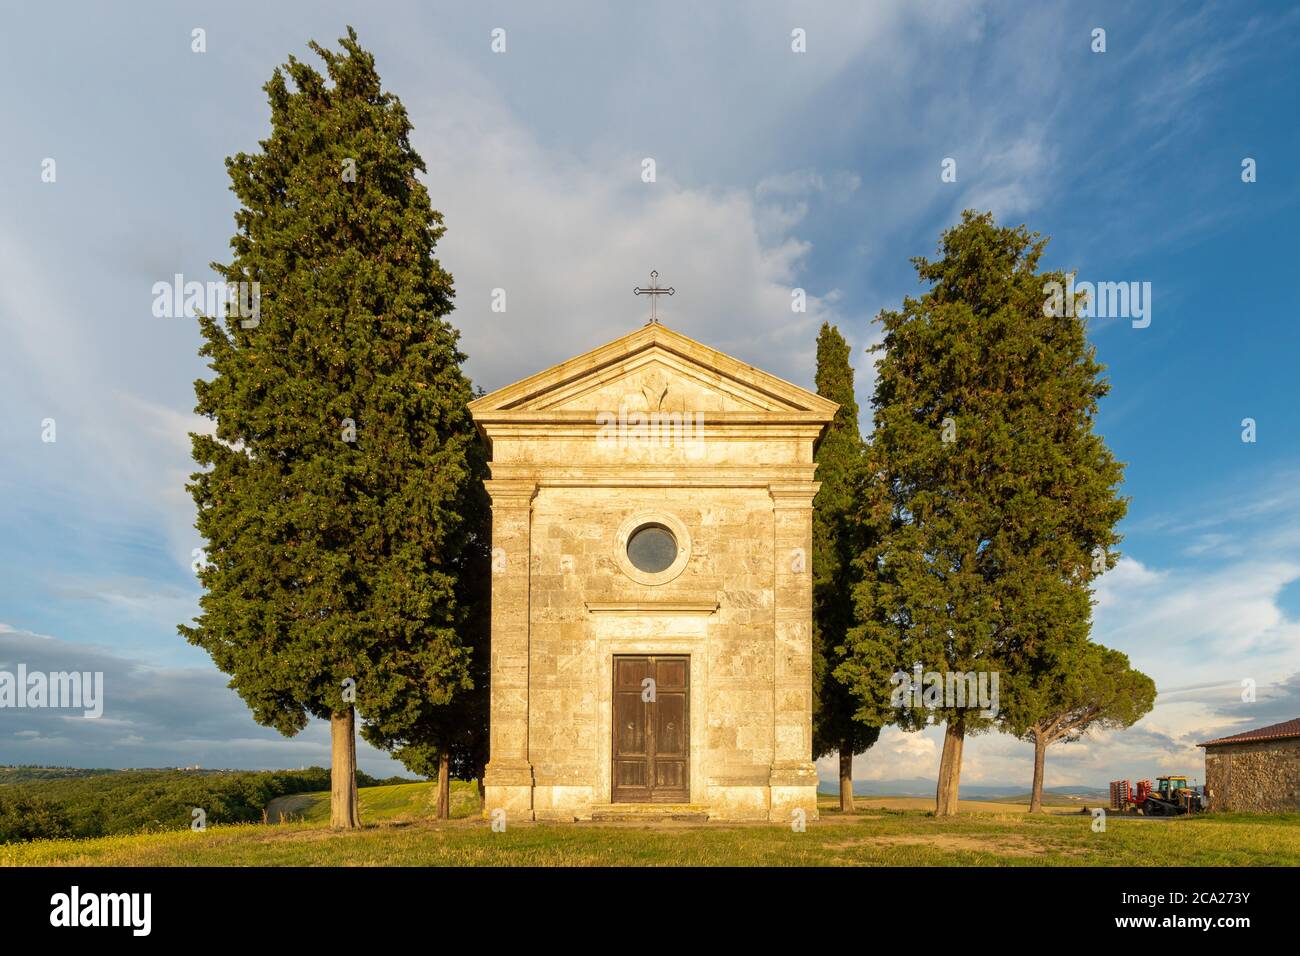 Front view of the iconic Tuscanian hilltop chapel of Vitaleta, surrounded by cypresses, under a summer blue sky with streaked clouds Stock Photo